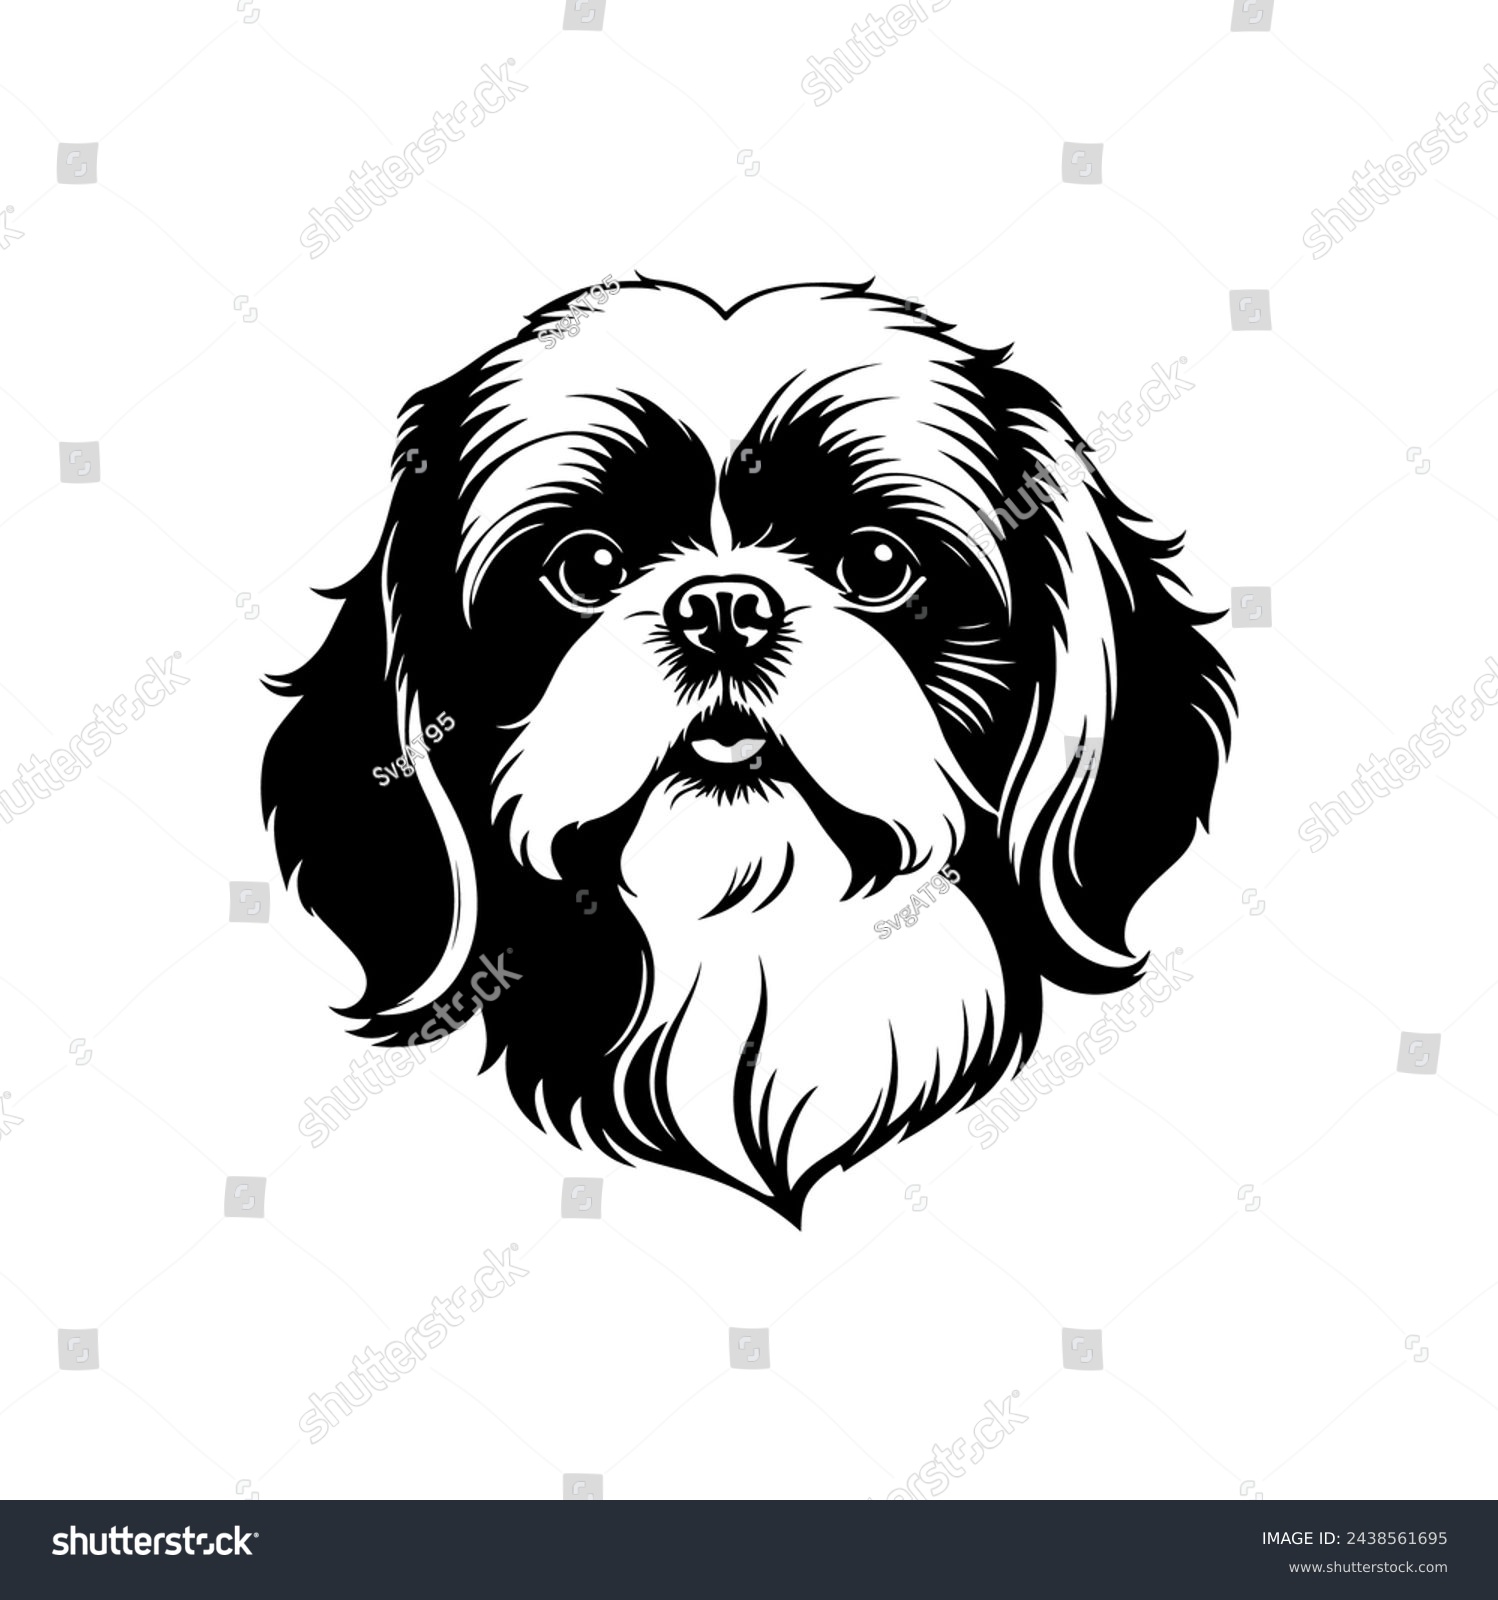 SVG of Portrait of a Shih Tzu Dog Vector isolated on white background, Dog Silhouettes. svg